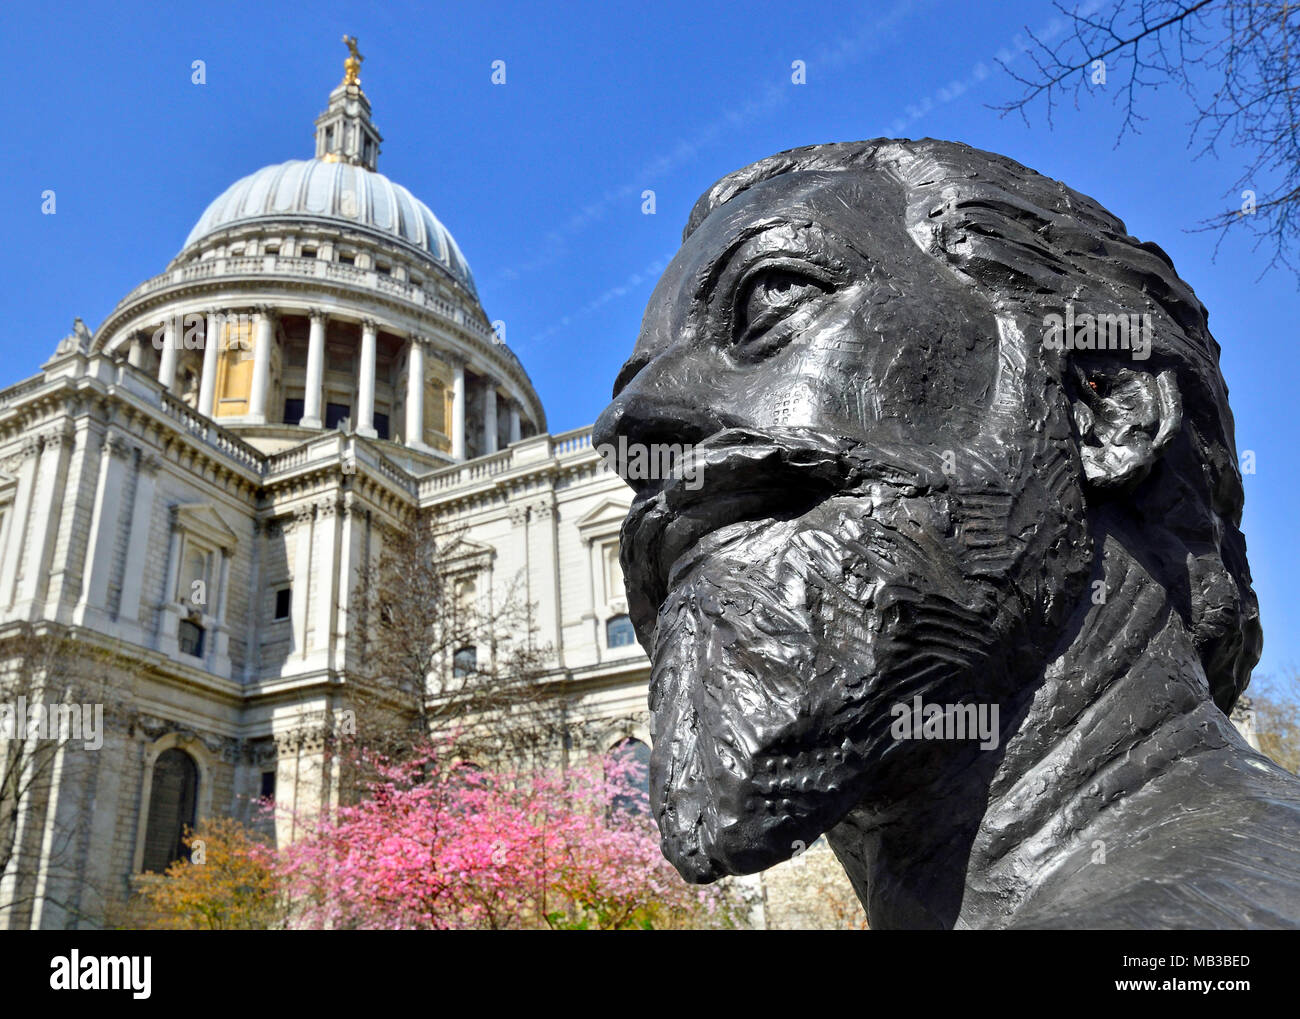 London, England, UK. Bust (by Nigel Boonham, 2012) of John Donne (1572-1631; poet and Dean of St Paul's Cathedral) in Festival Gardens,... Stock Photo